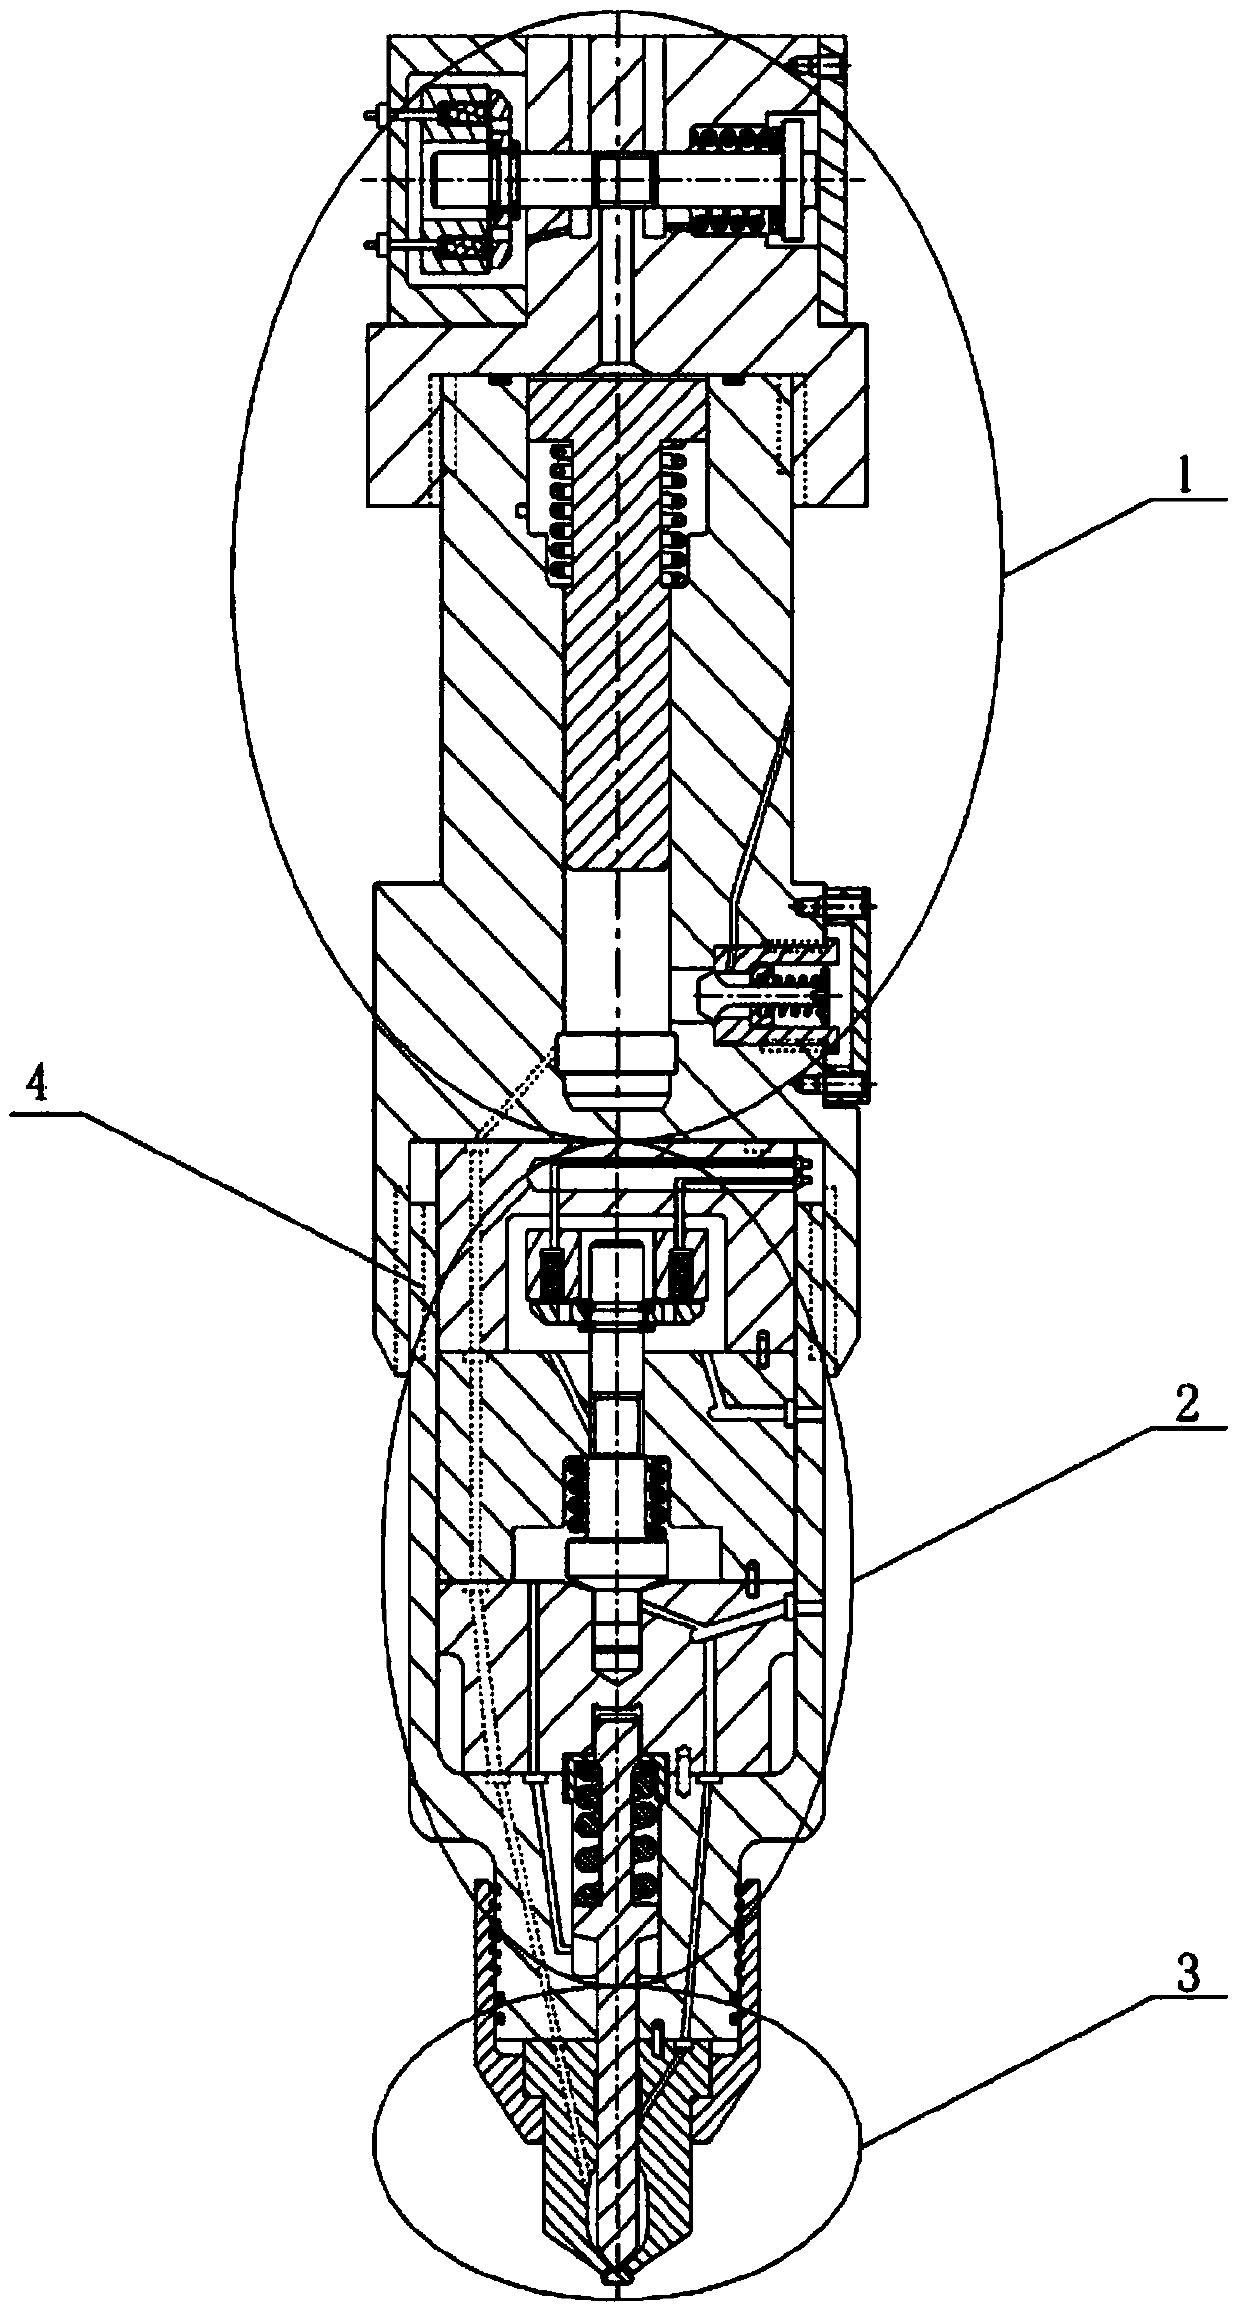 Pressurized leakage-free electromagnetically-controlled gas injection device